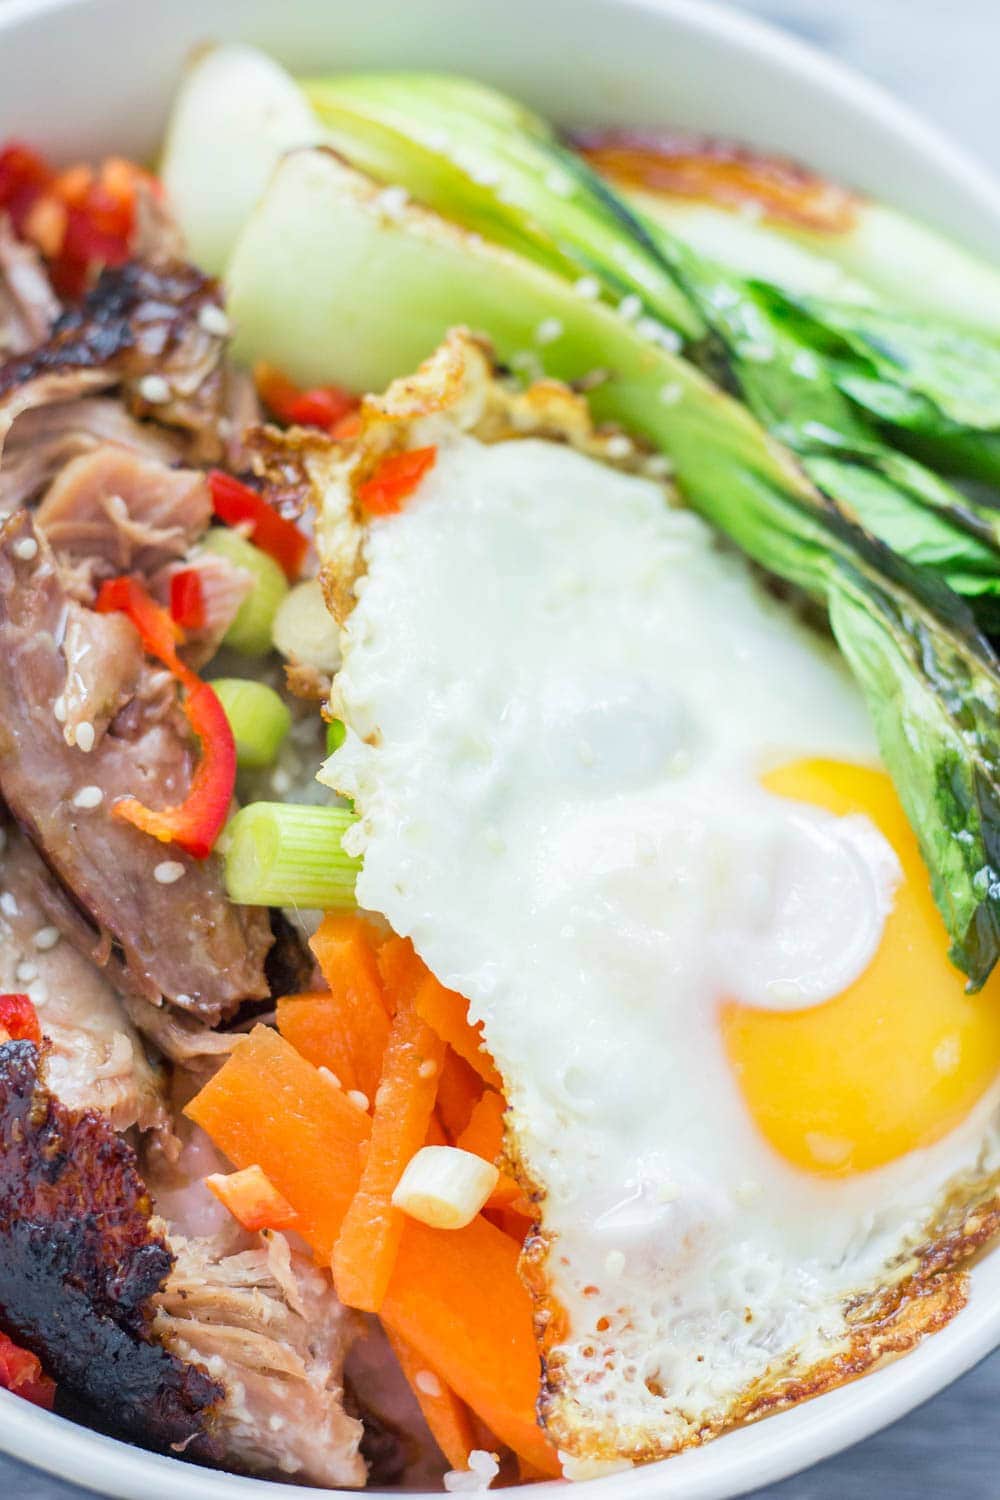 Japanese roast duck legs are shredded and served over sticky rice with pak choi, chilli and perfectly soft fried egg for a tasty dinner all in one bowl! #japanese #duck #roastduck #recipe #healthyrecipe